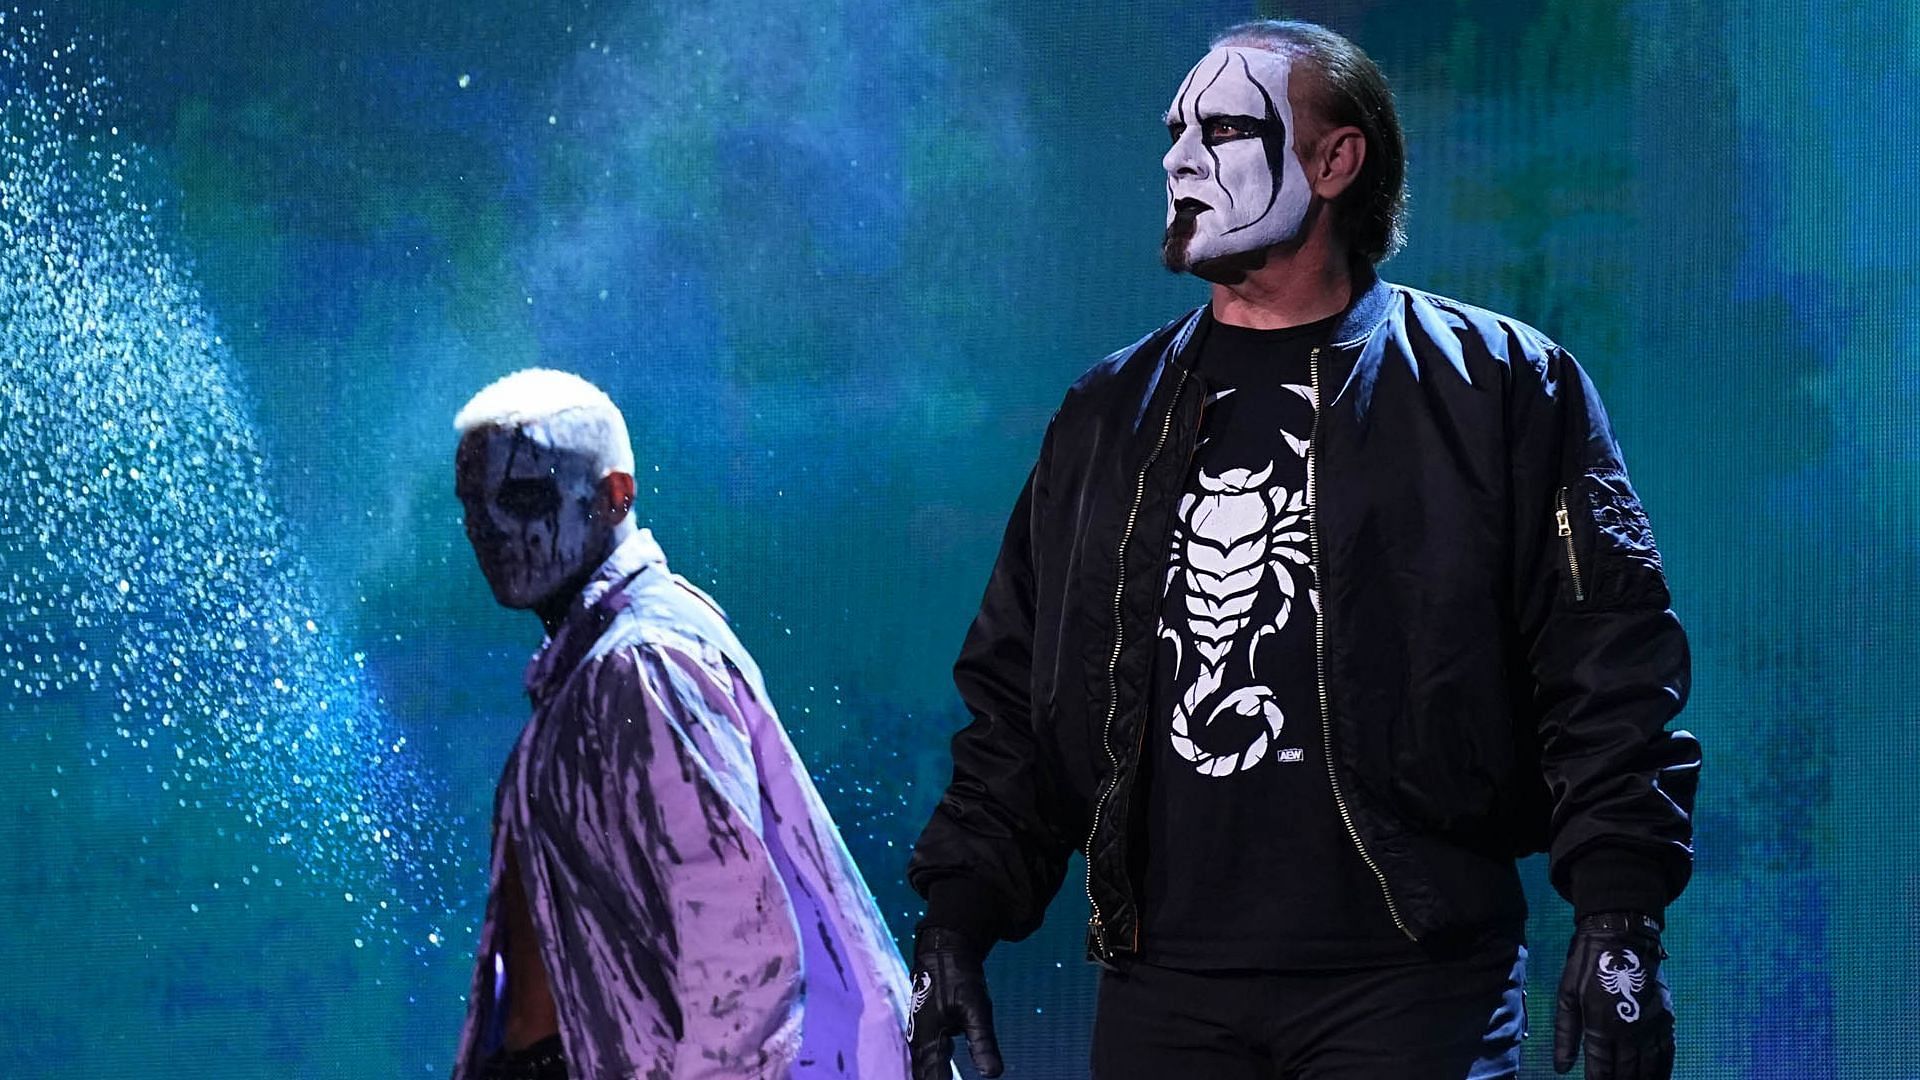 Sting and his protege, Darby Allin (image credit: All Elite Wrestling)